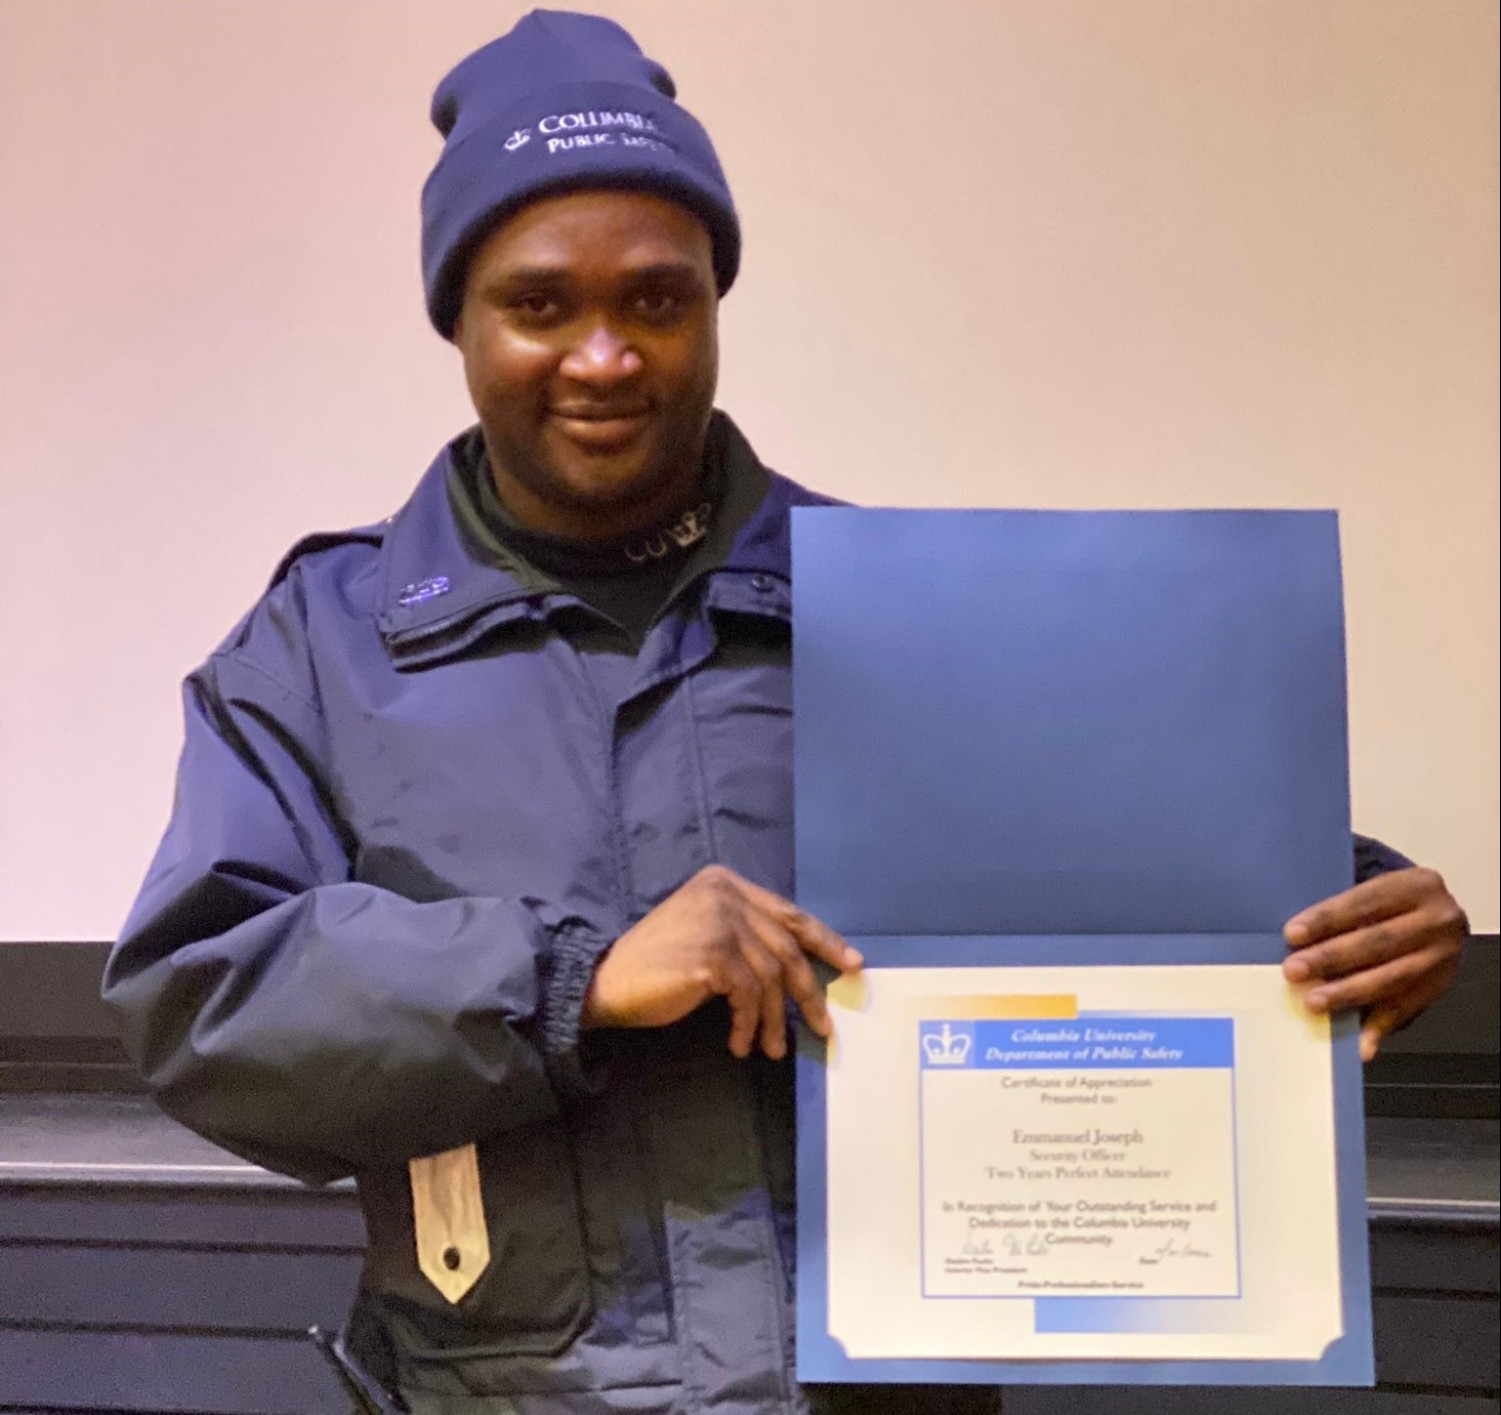 man in Public Safety uniform holding up a perfect attendance certificate